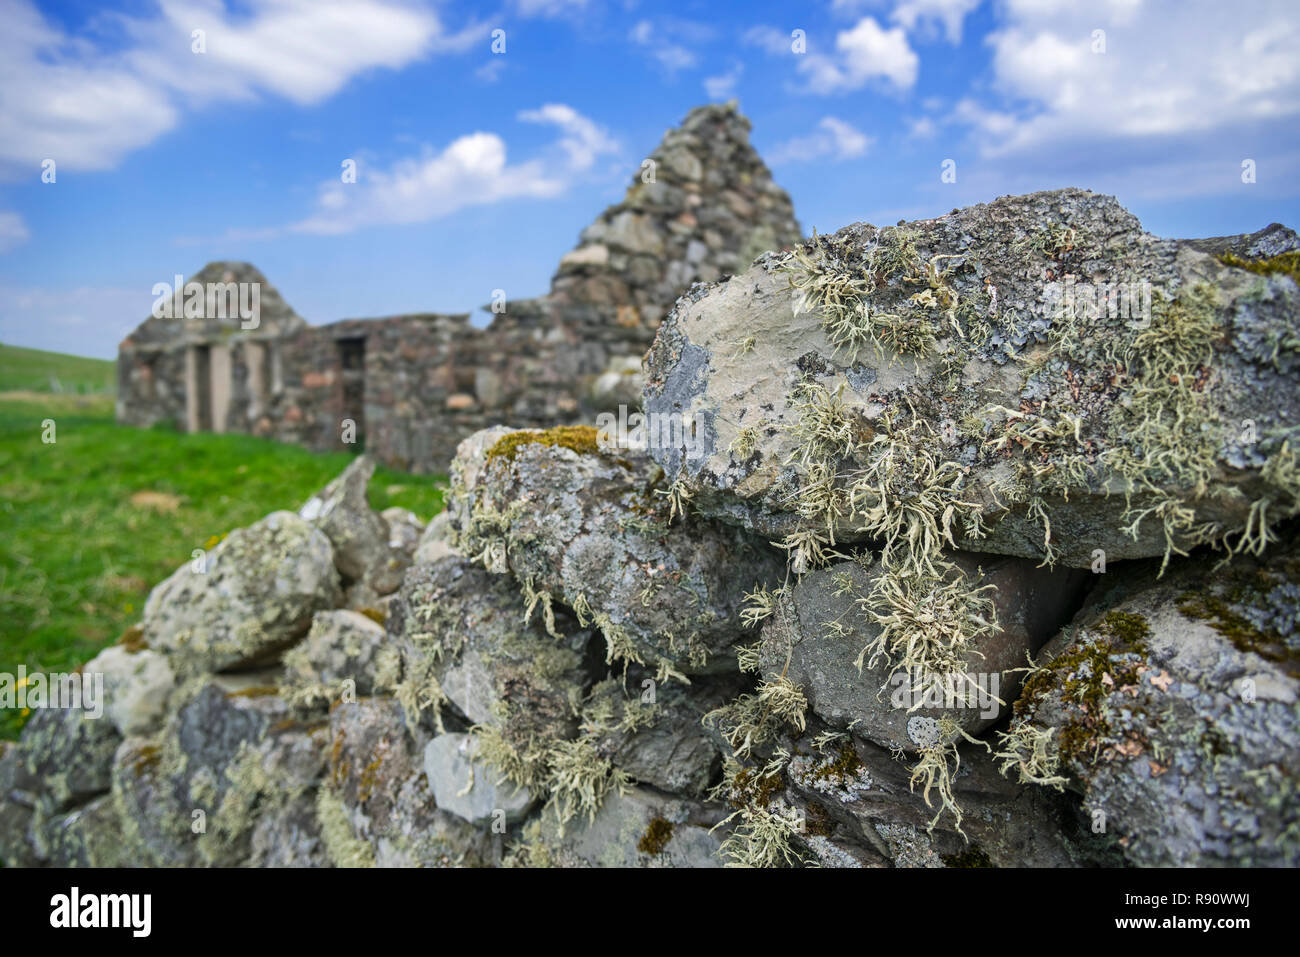 Lichen on dry stone / drystack wall and remains of croft, abandoned during the Scottish Highland Clearances, Shetland Islands, Scotland, UK Stock Photo